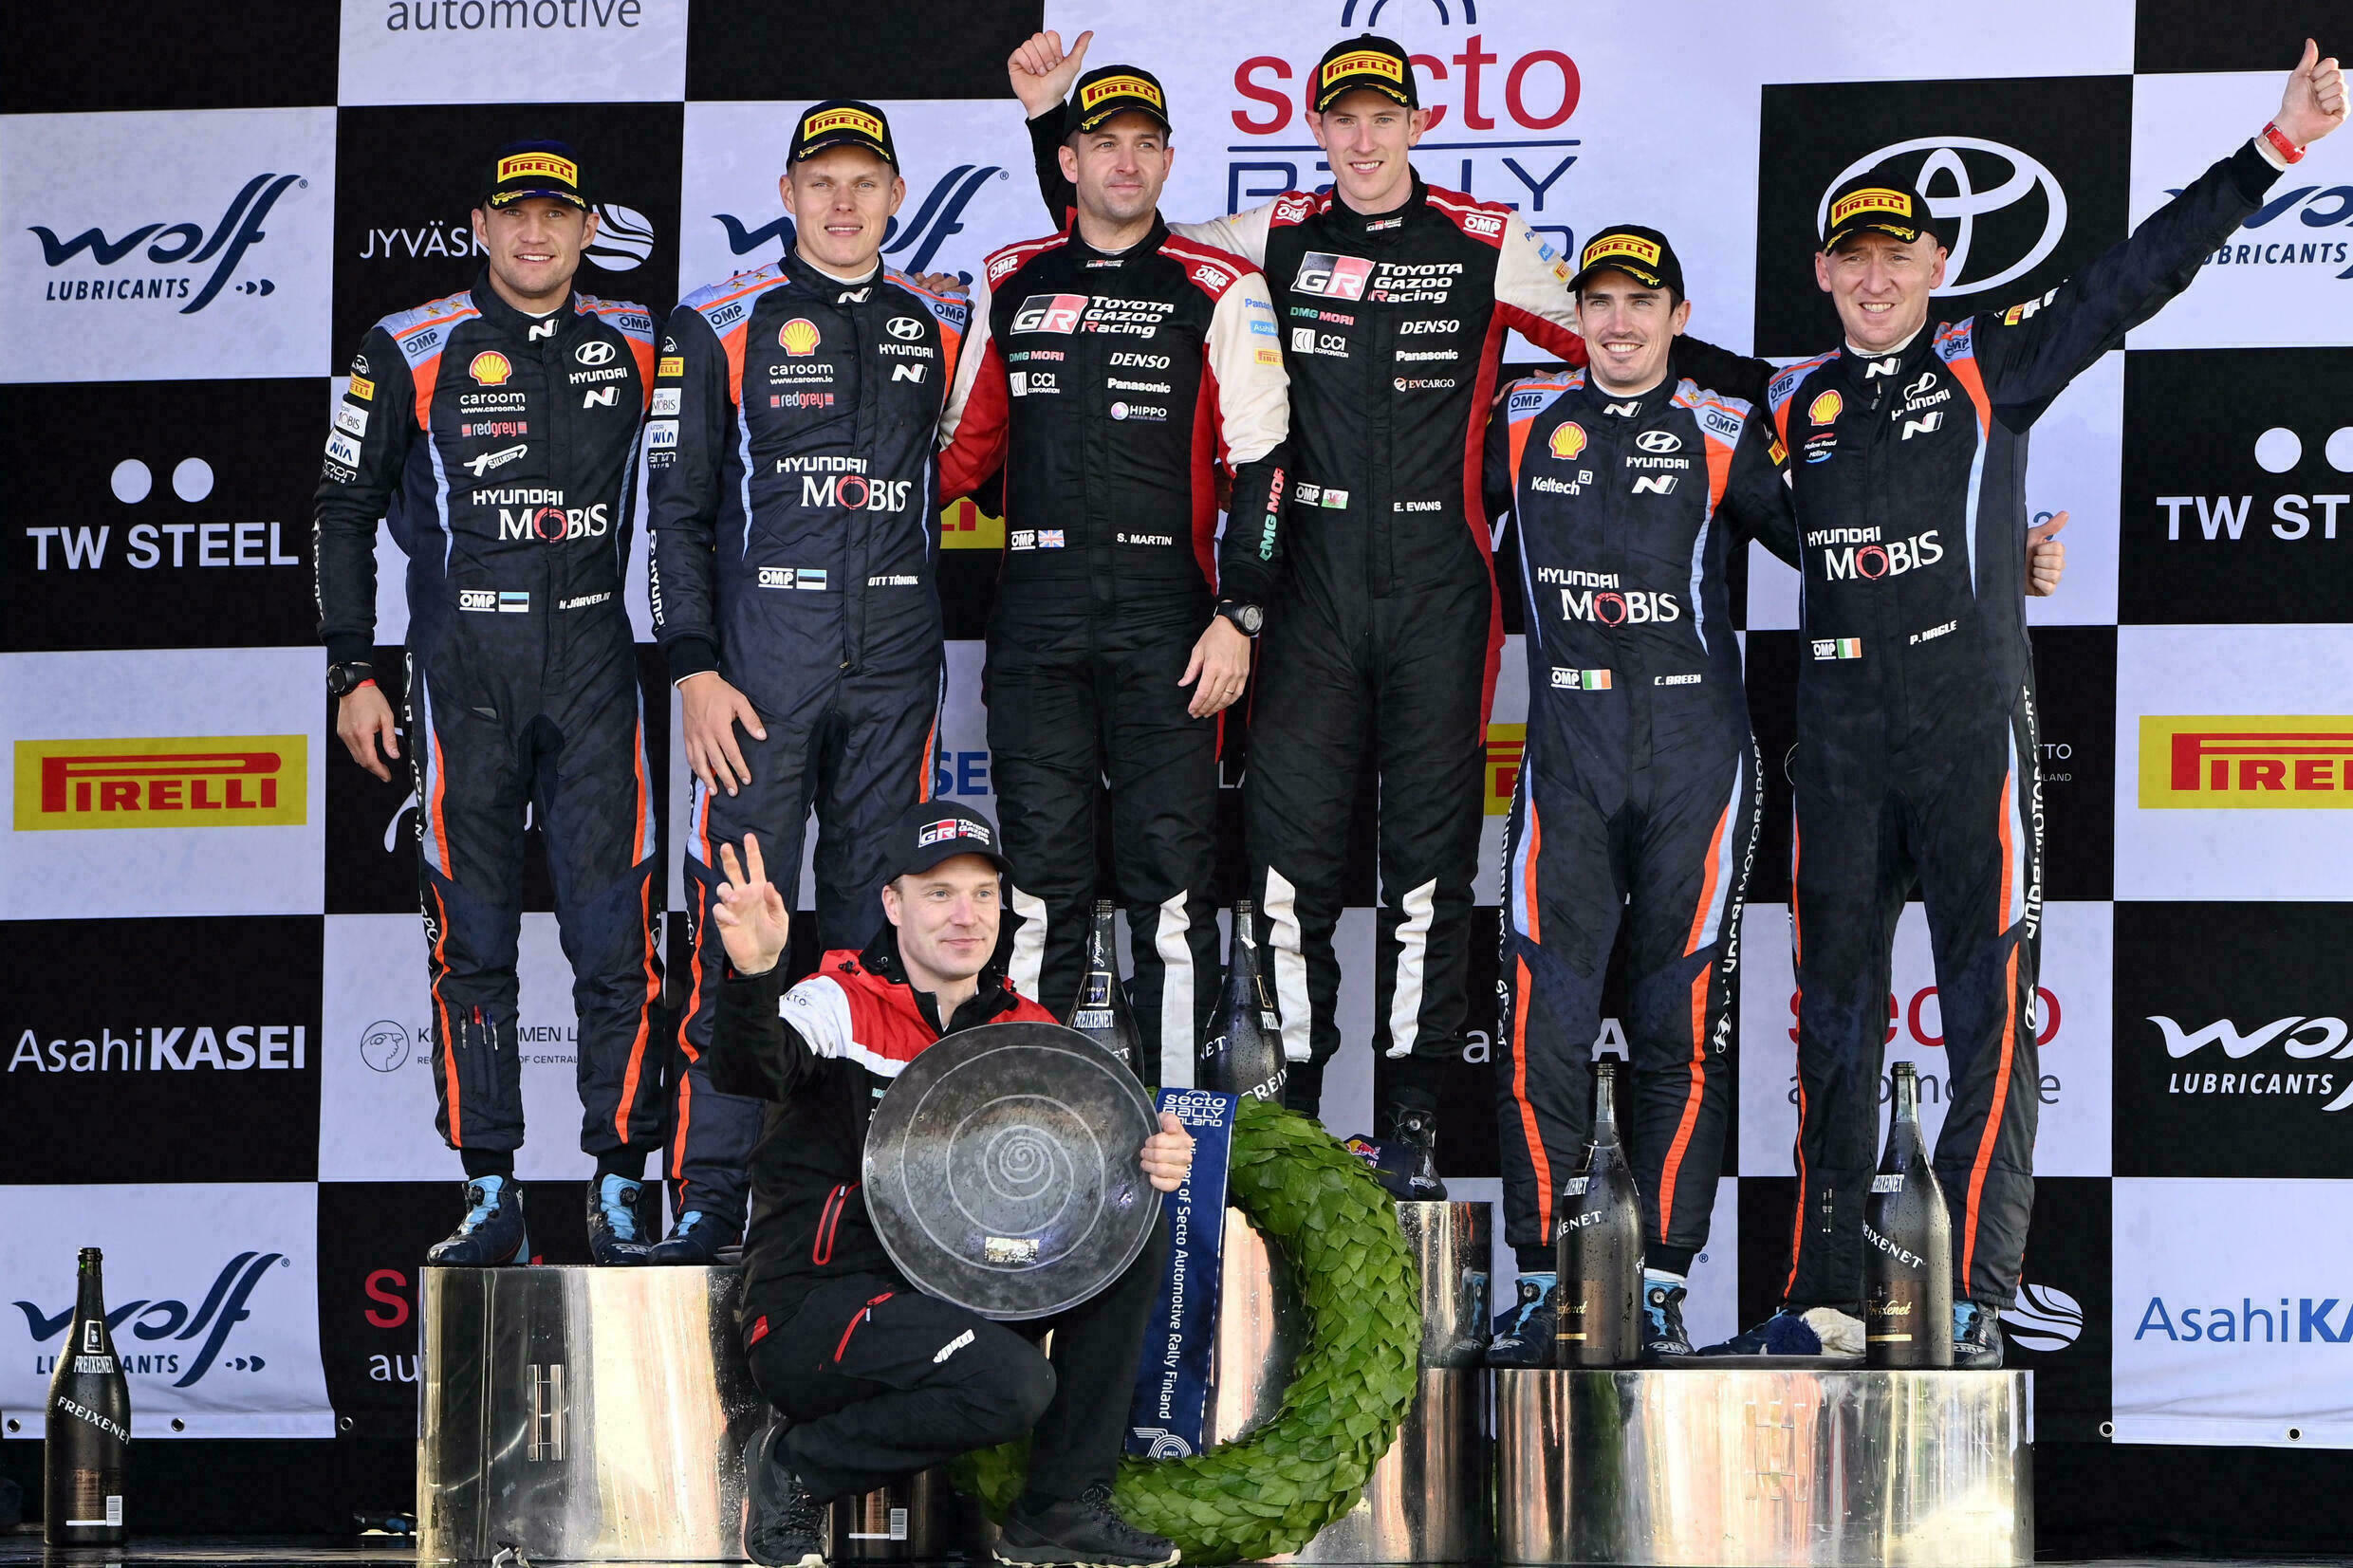 The podium at the Rally Finland, on October 3, 2021 in Lucknow